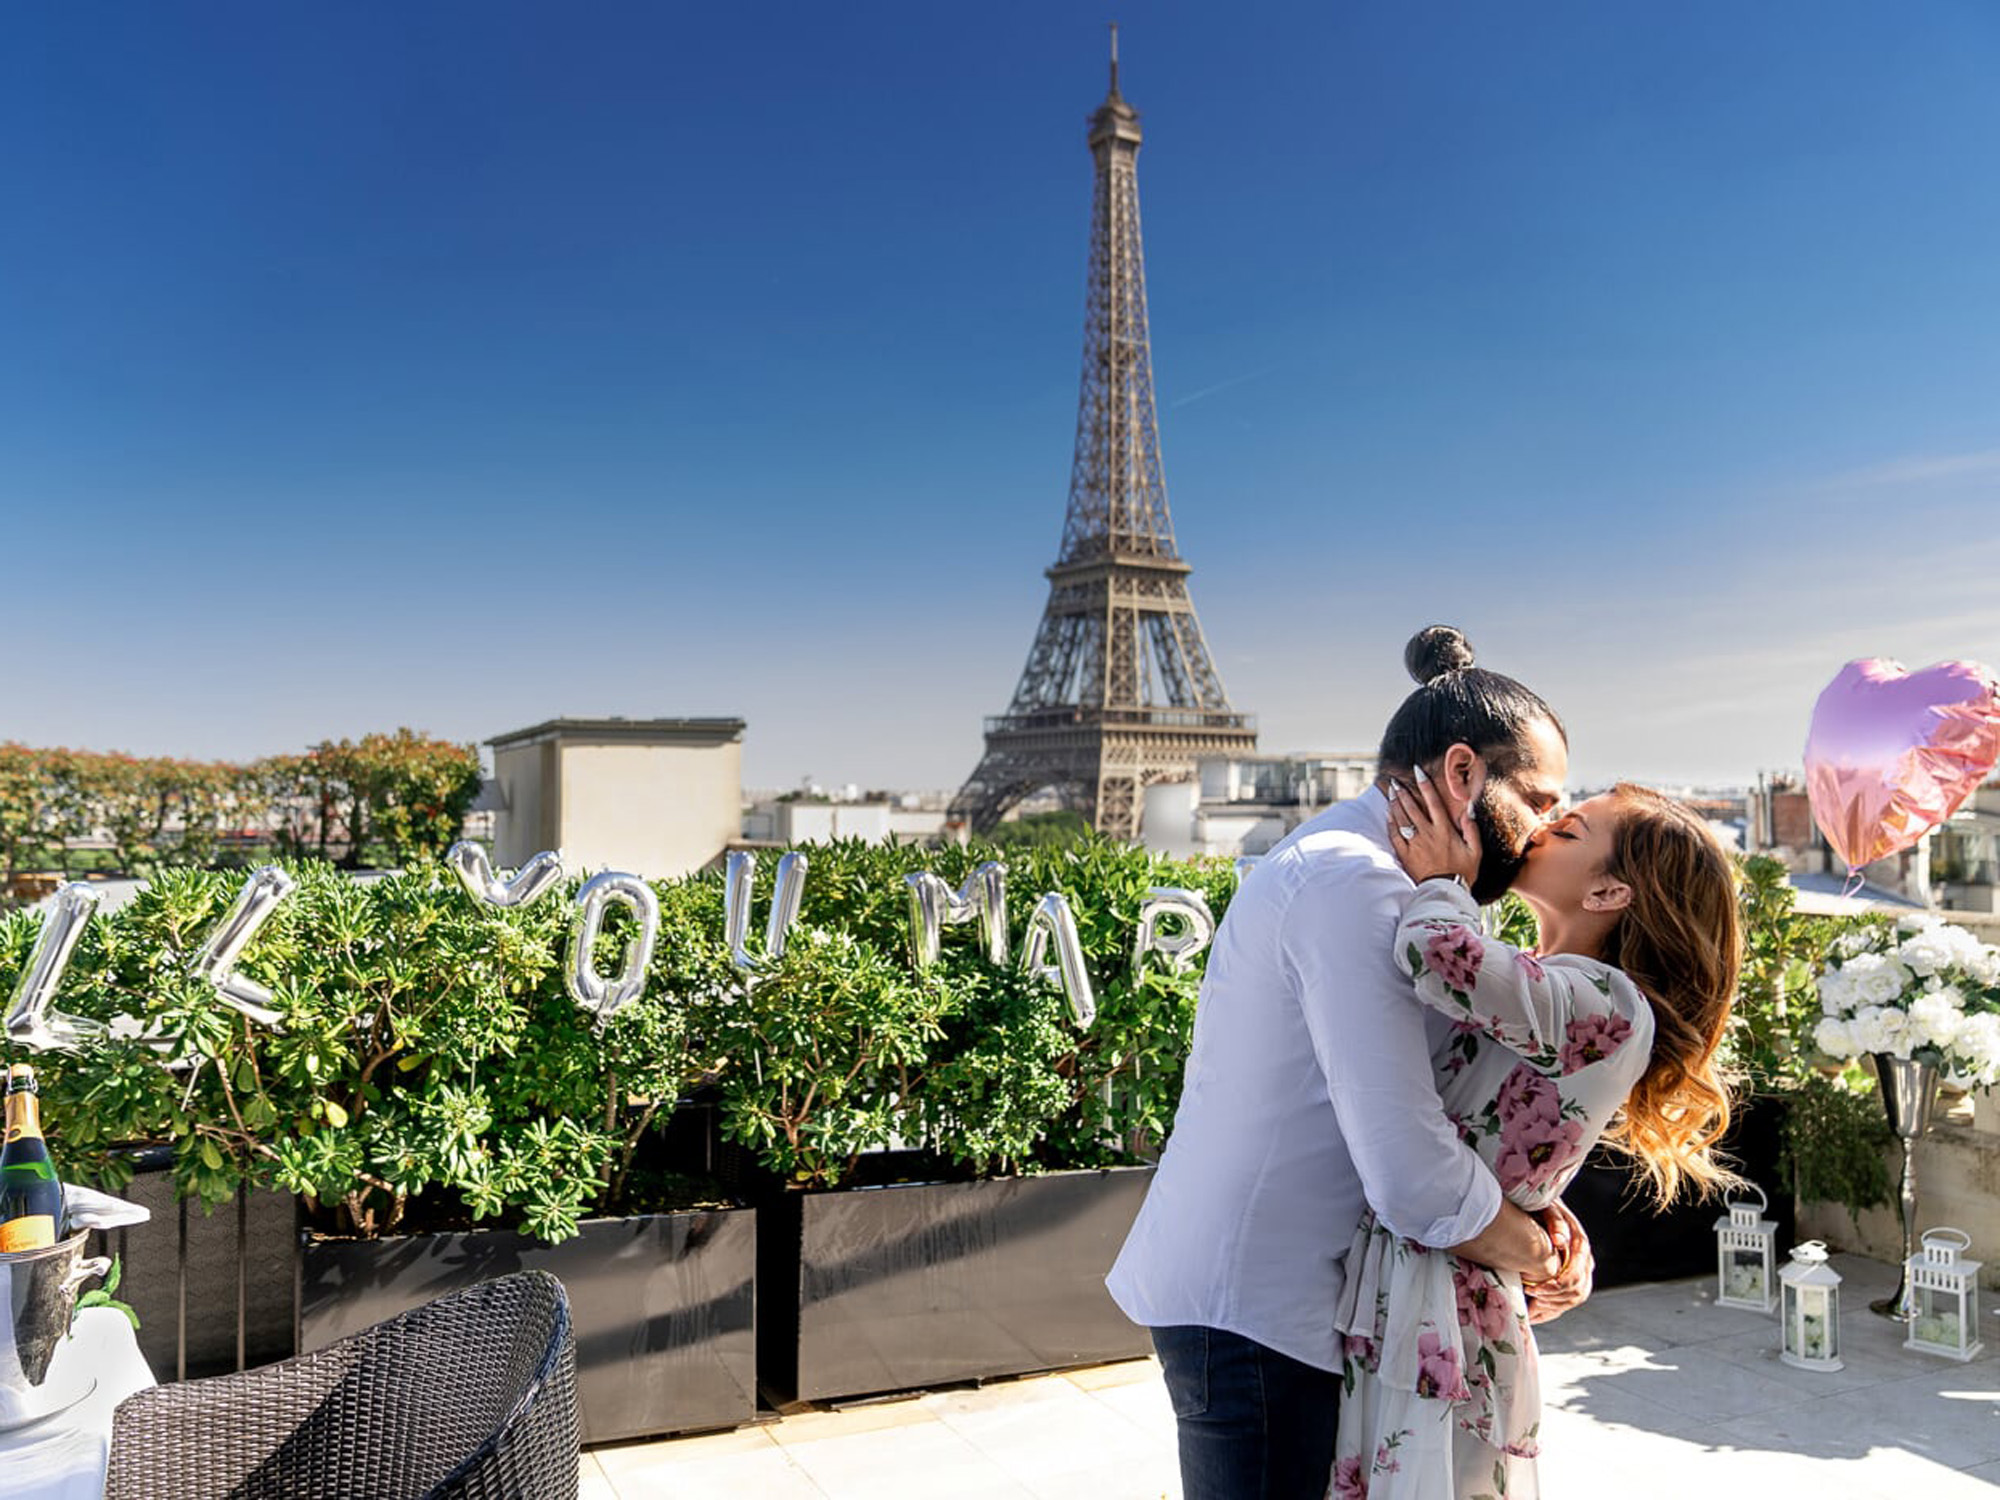 The Best Hotels In Paris To Propose | The Proposers